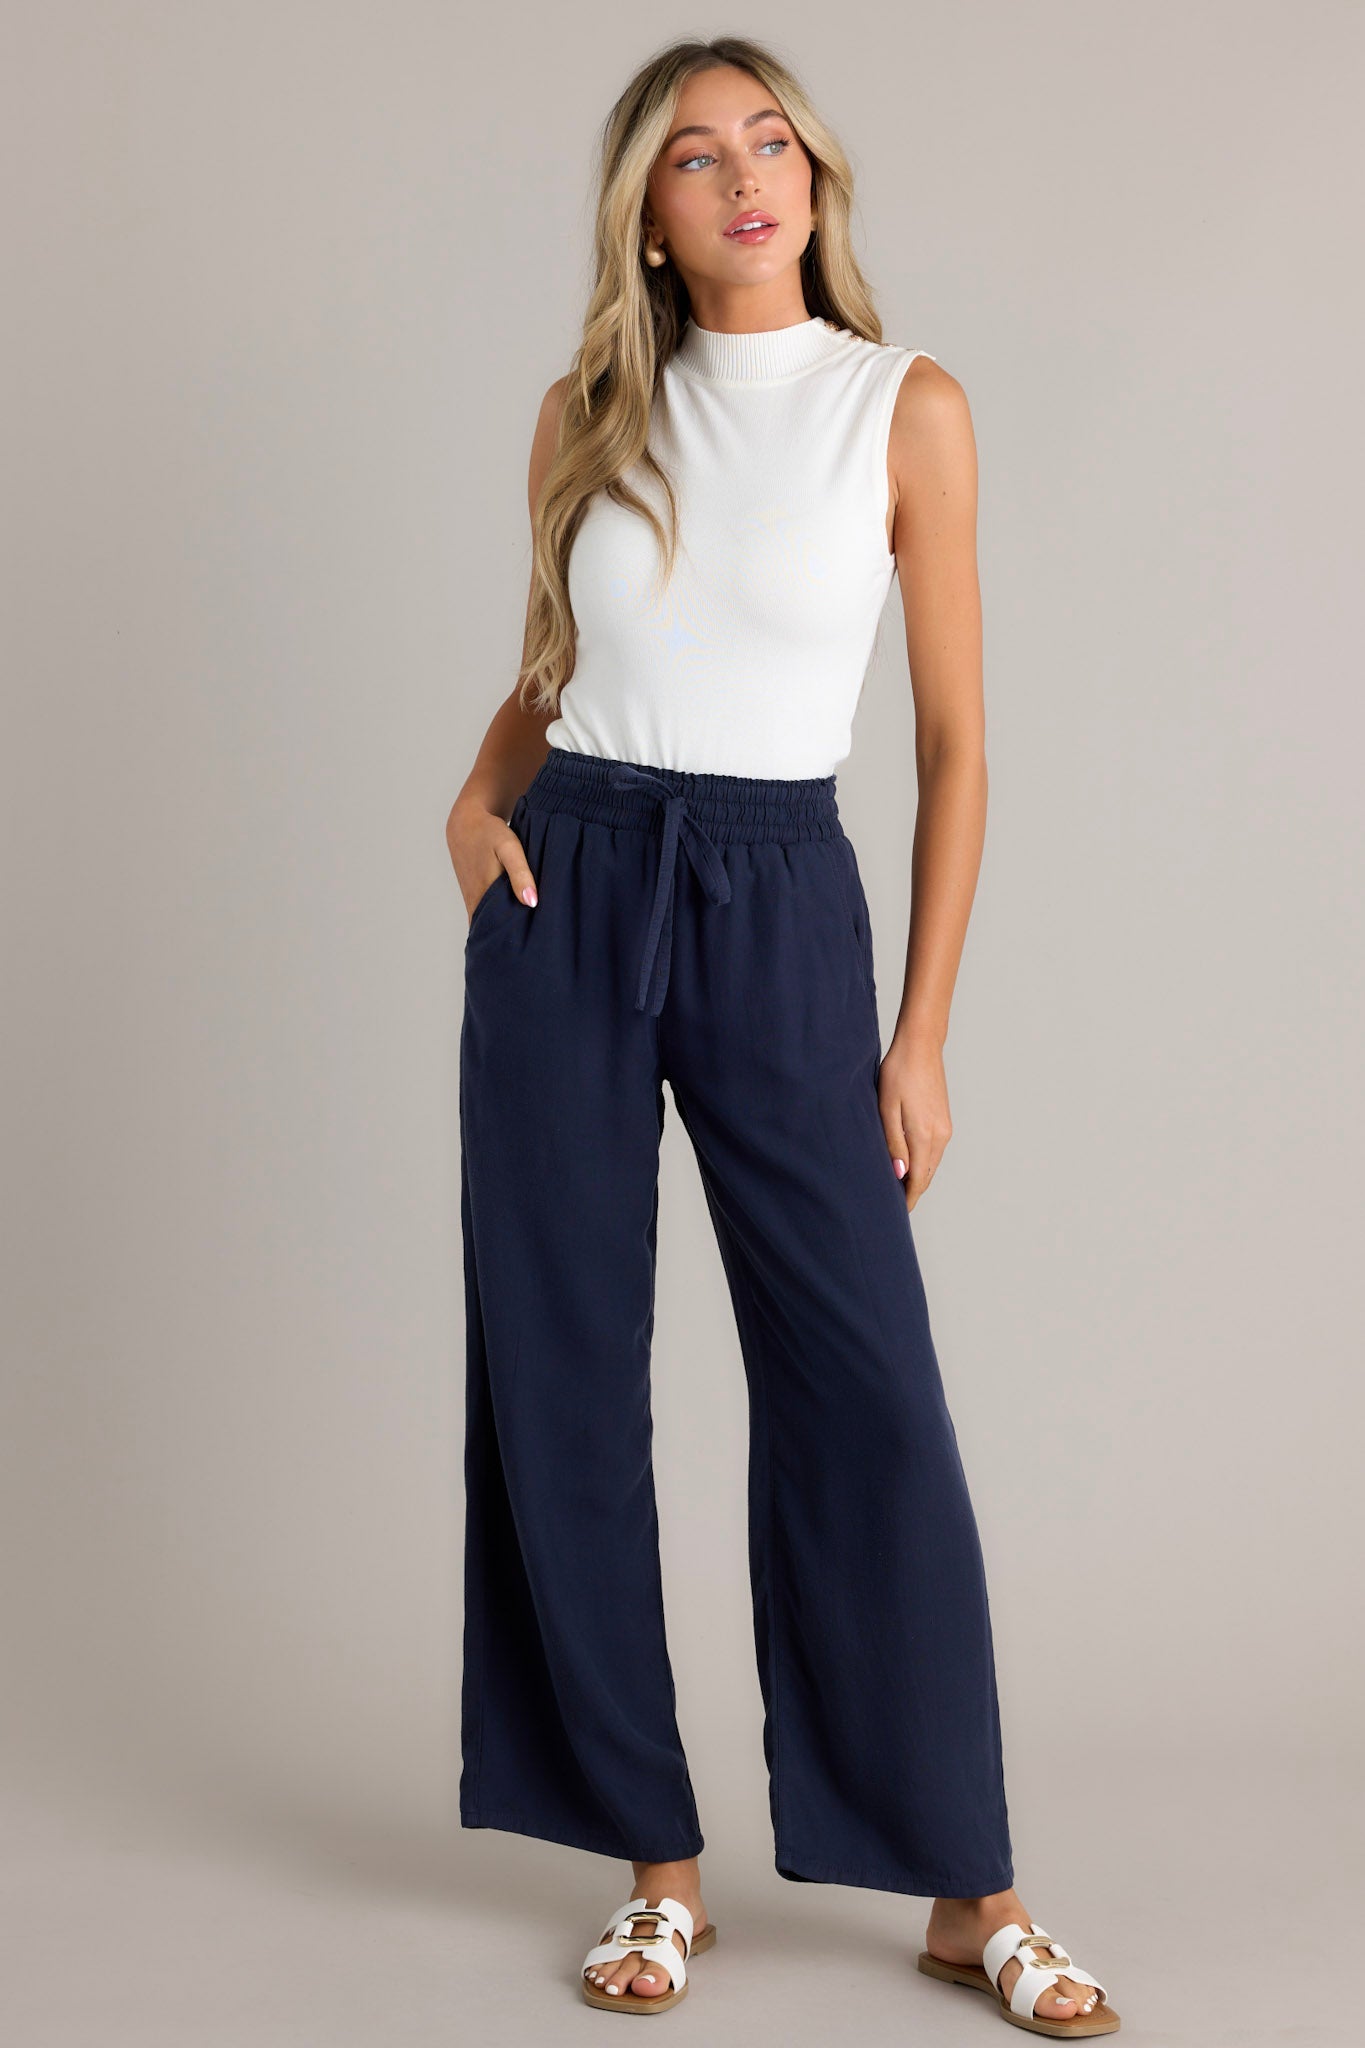 Navy wide-leg pants with an elastic waistband and drawstring, paired with white sandals.